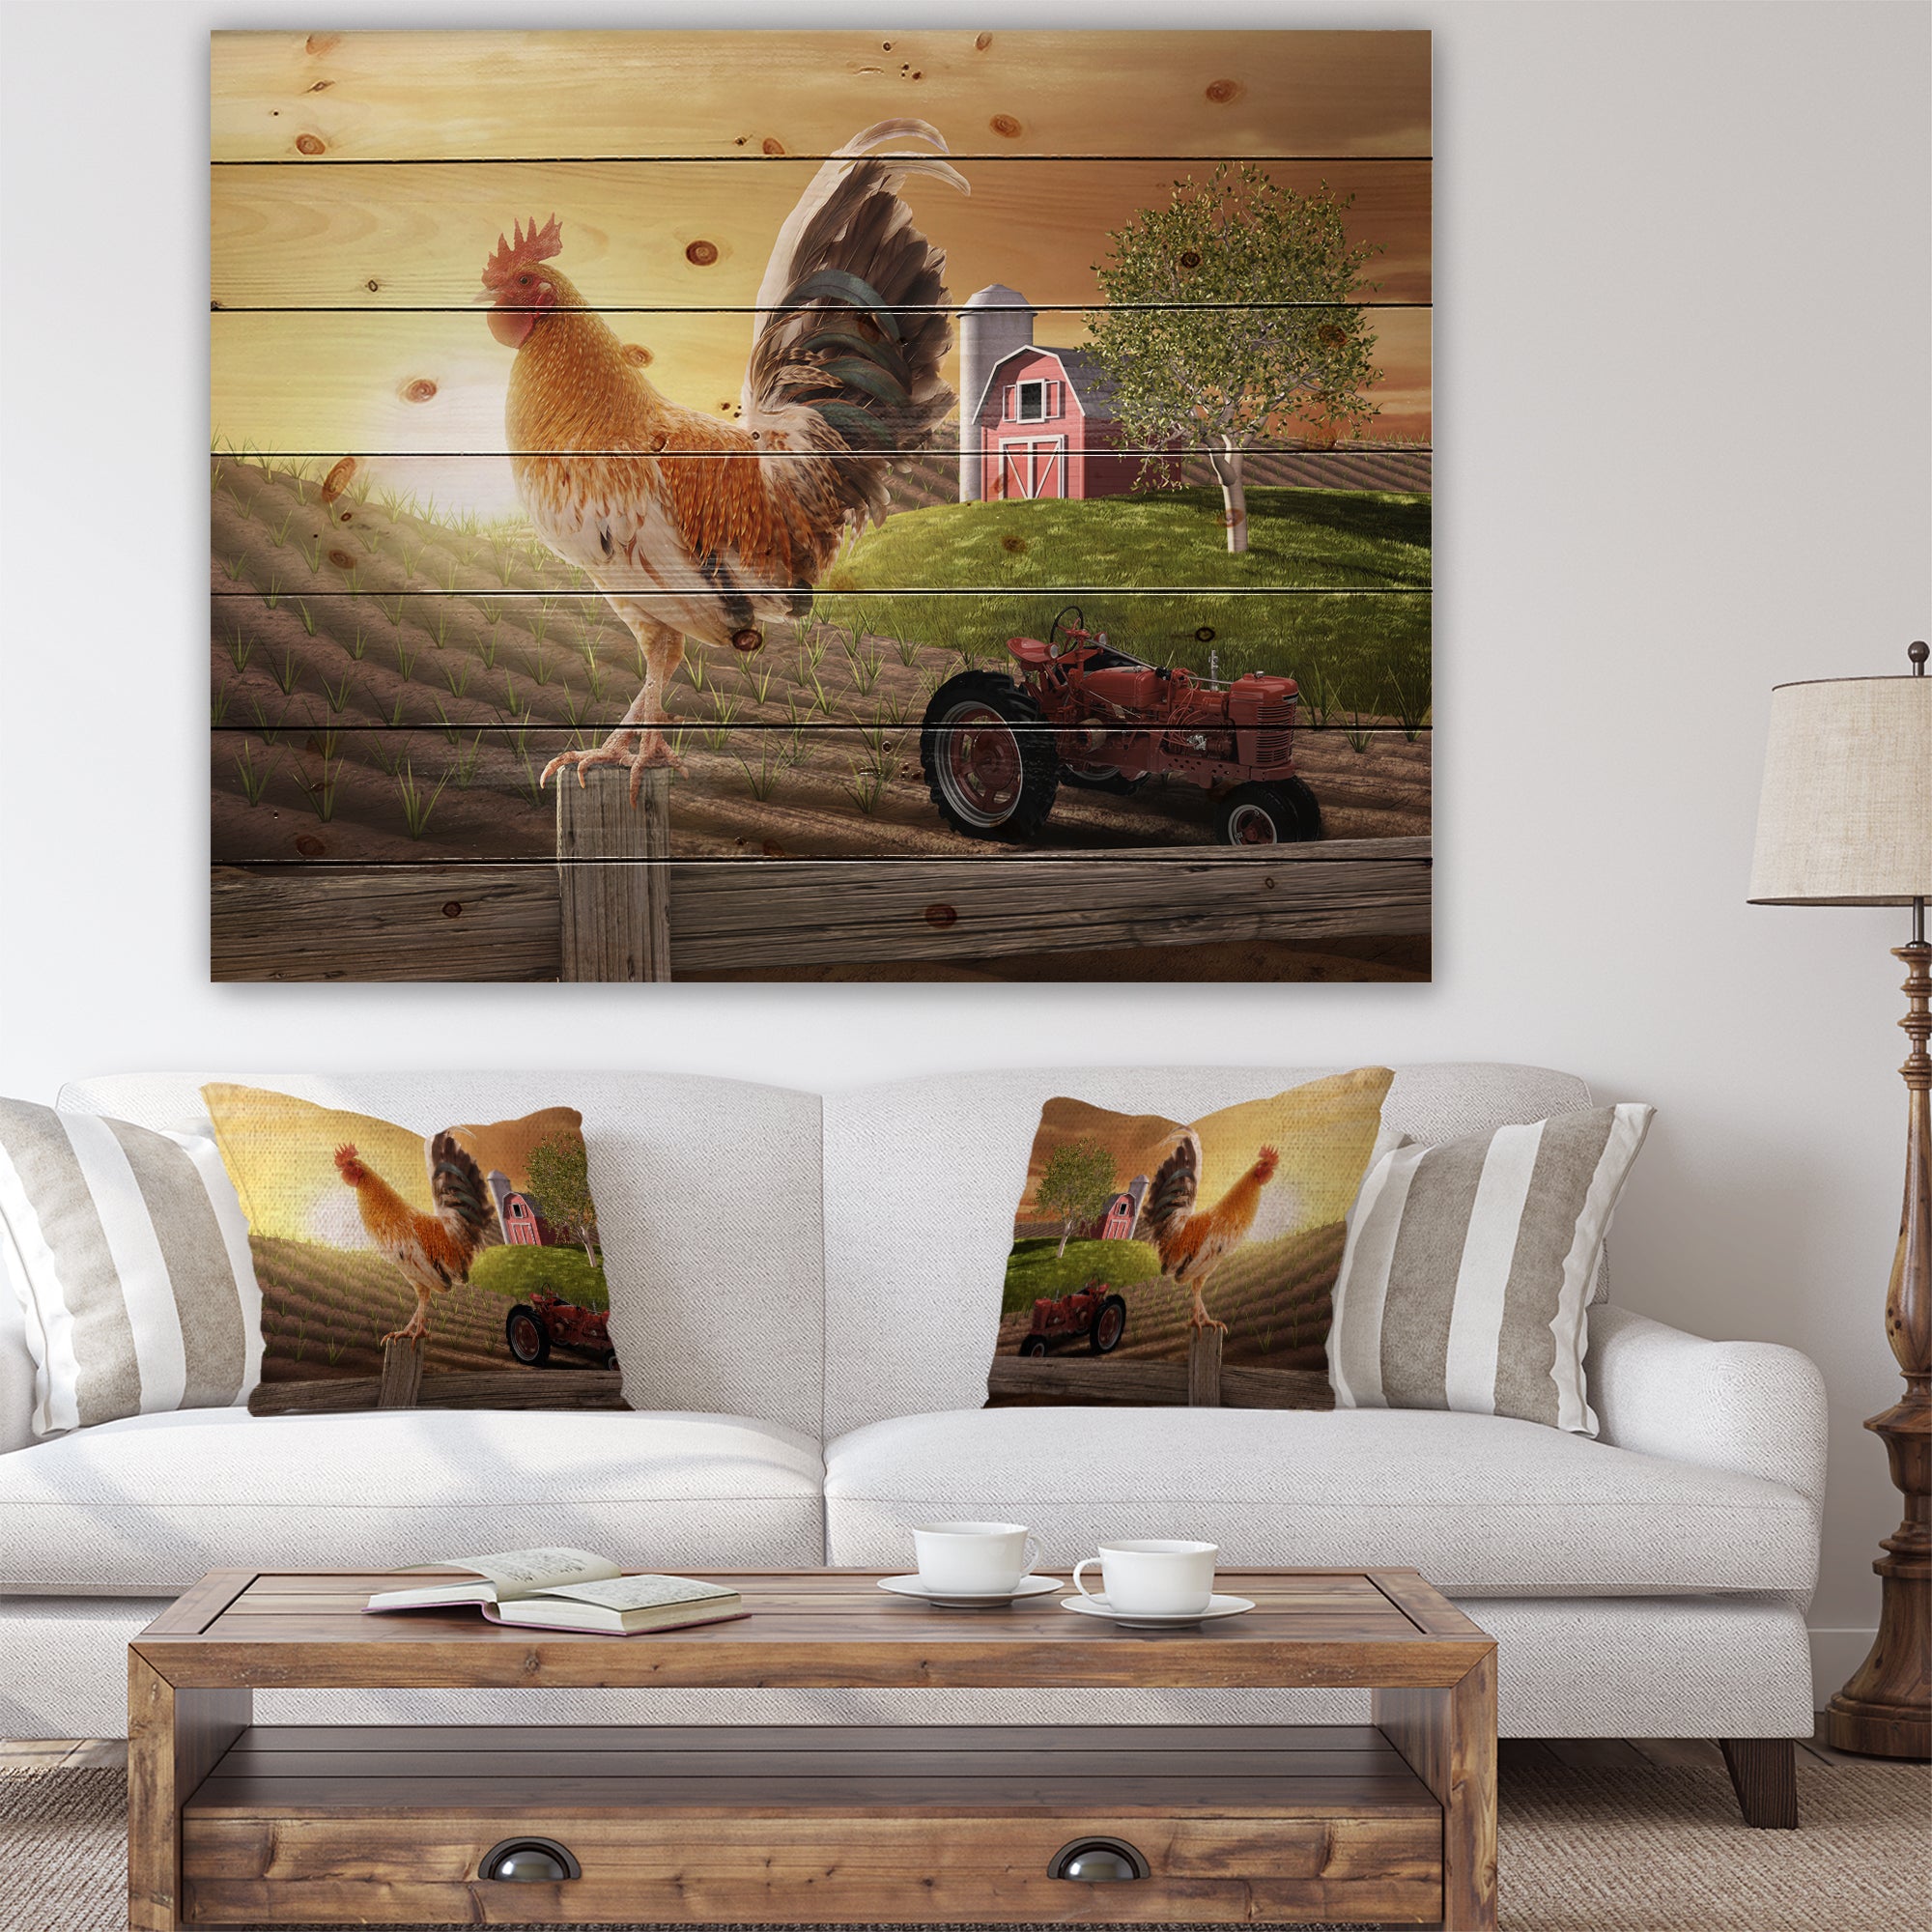 Country Farm Morning - Farmhouse Animal Painting Print on Natural Pine Wood - 20x15